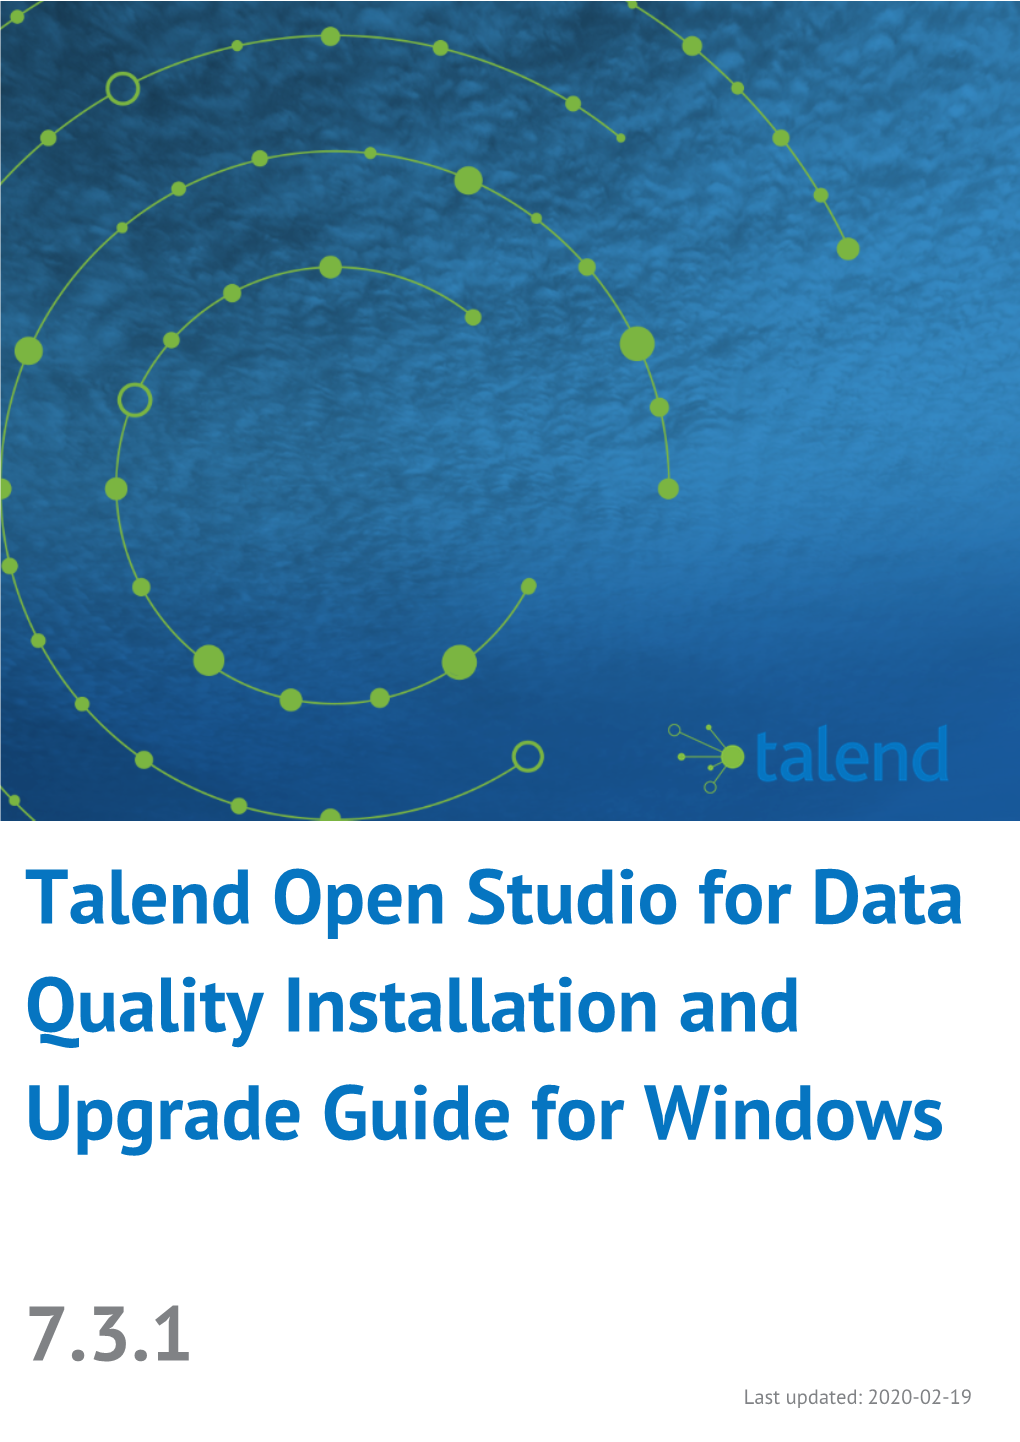 Talend Open Studio for Data Quality Installation and Upgrade Guide for Windows